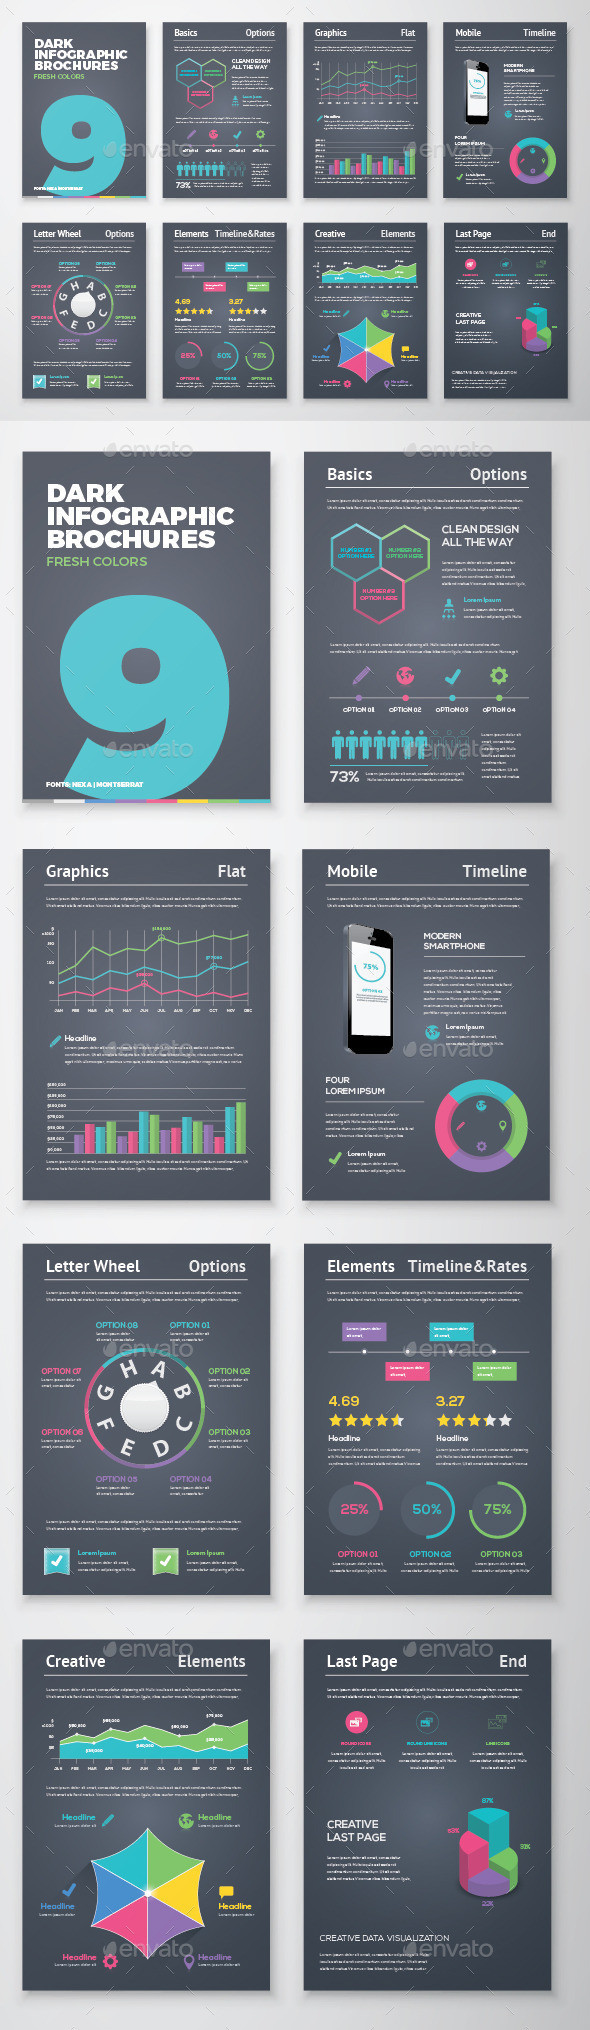 Infographic tools 9 boxed darkt gr preview